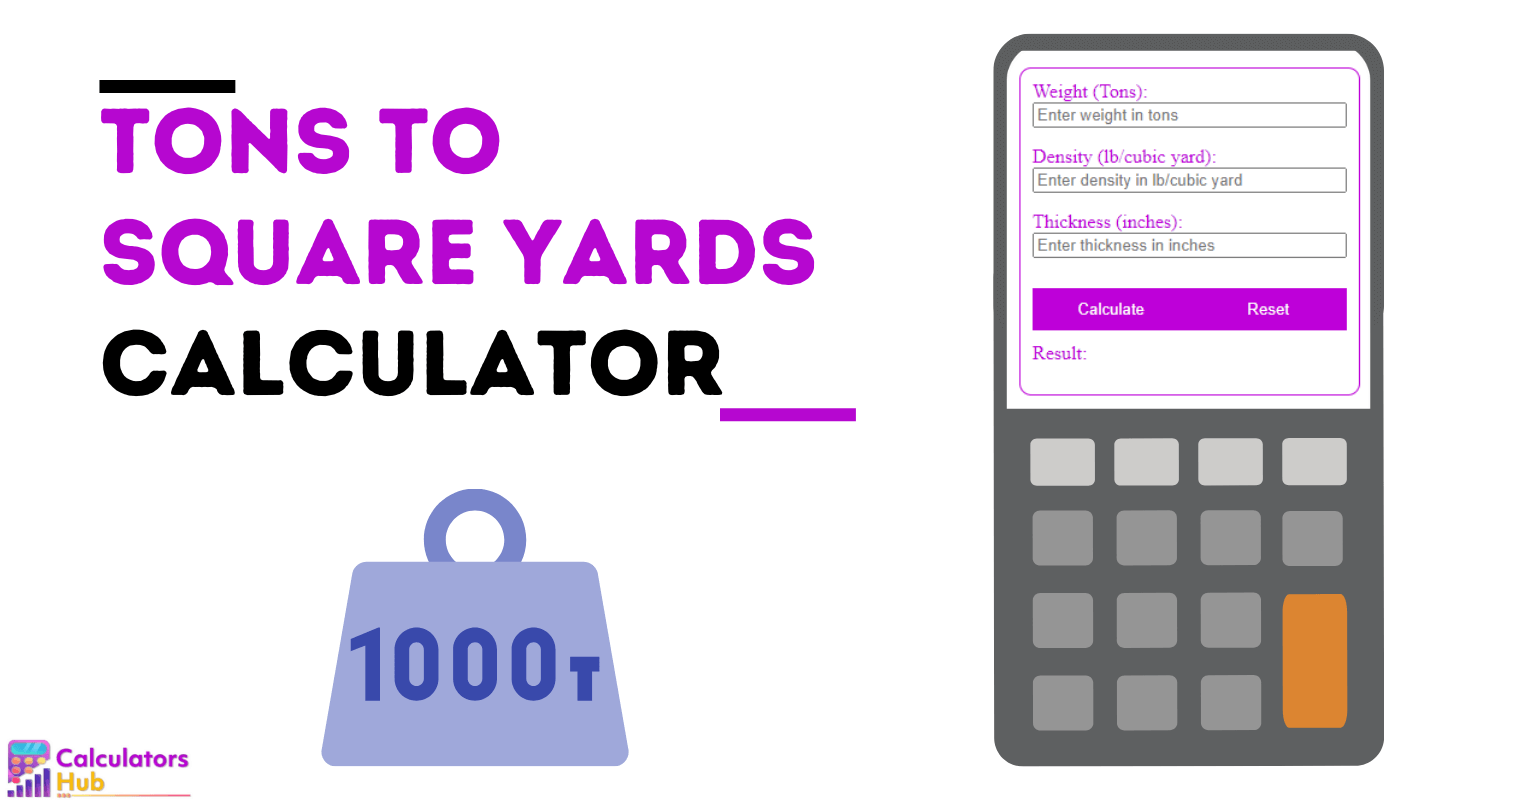 Tons to Square Yards Calculator